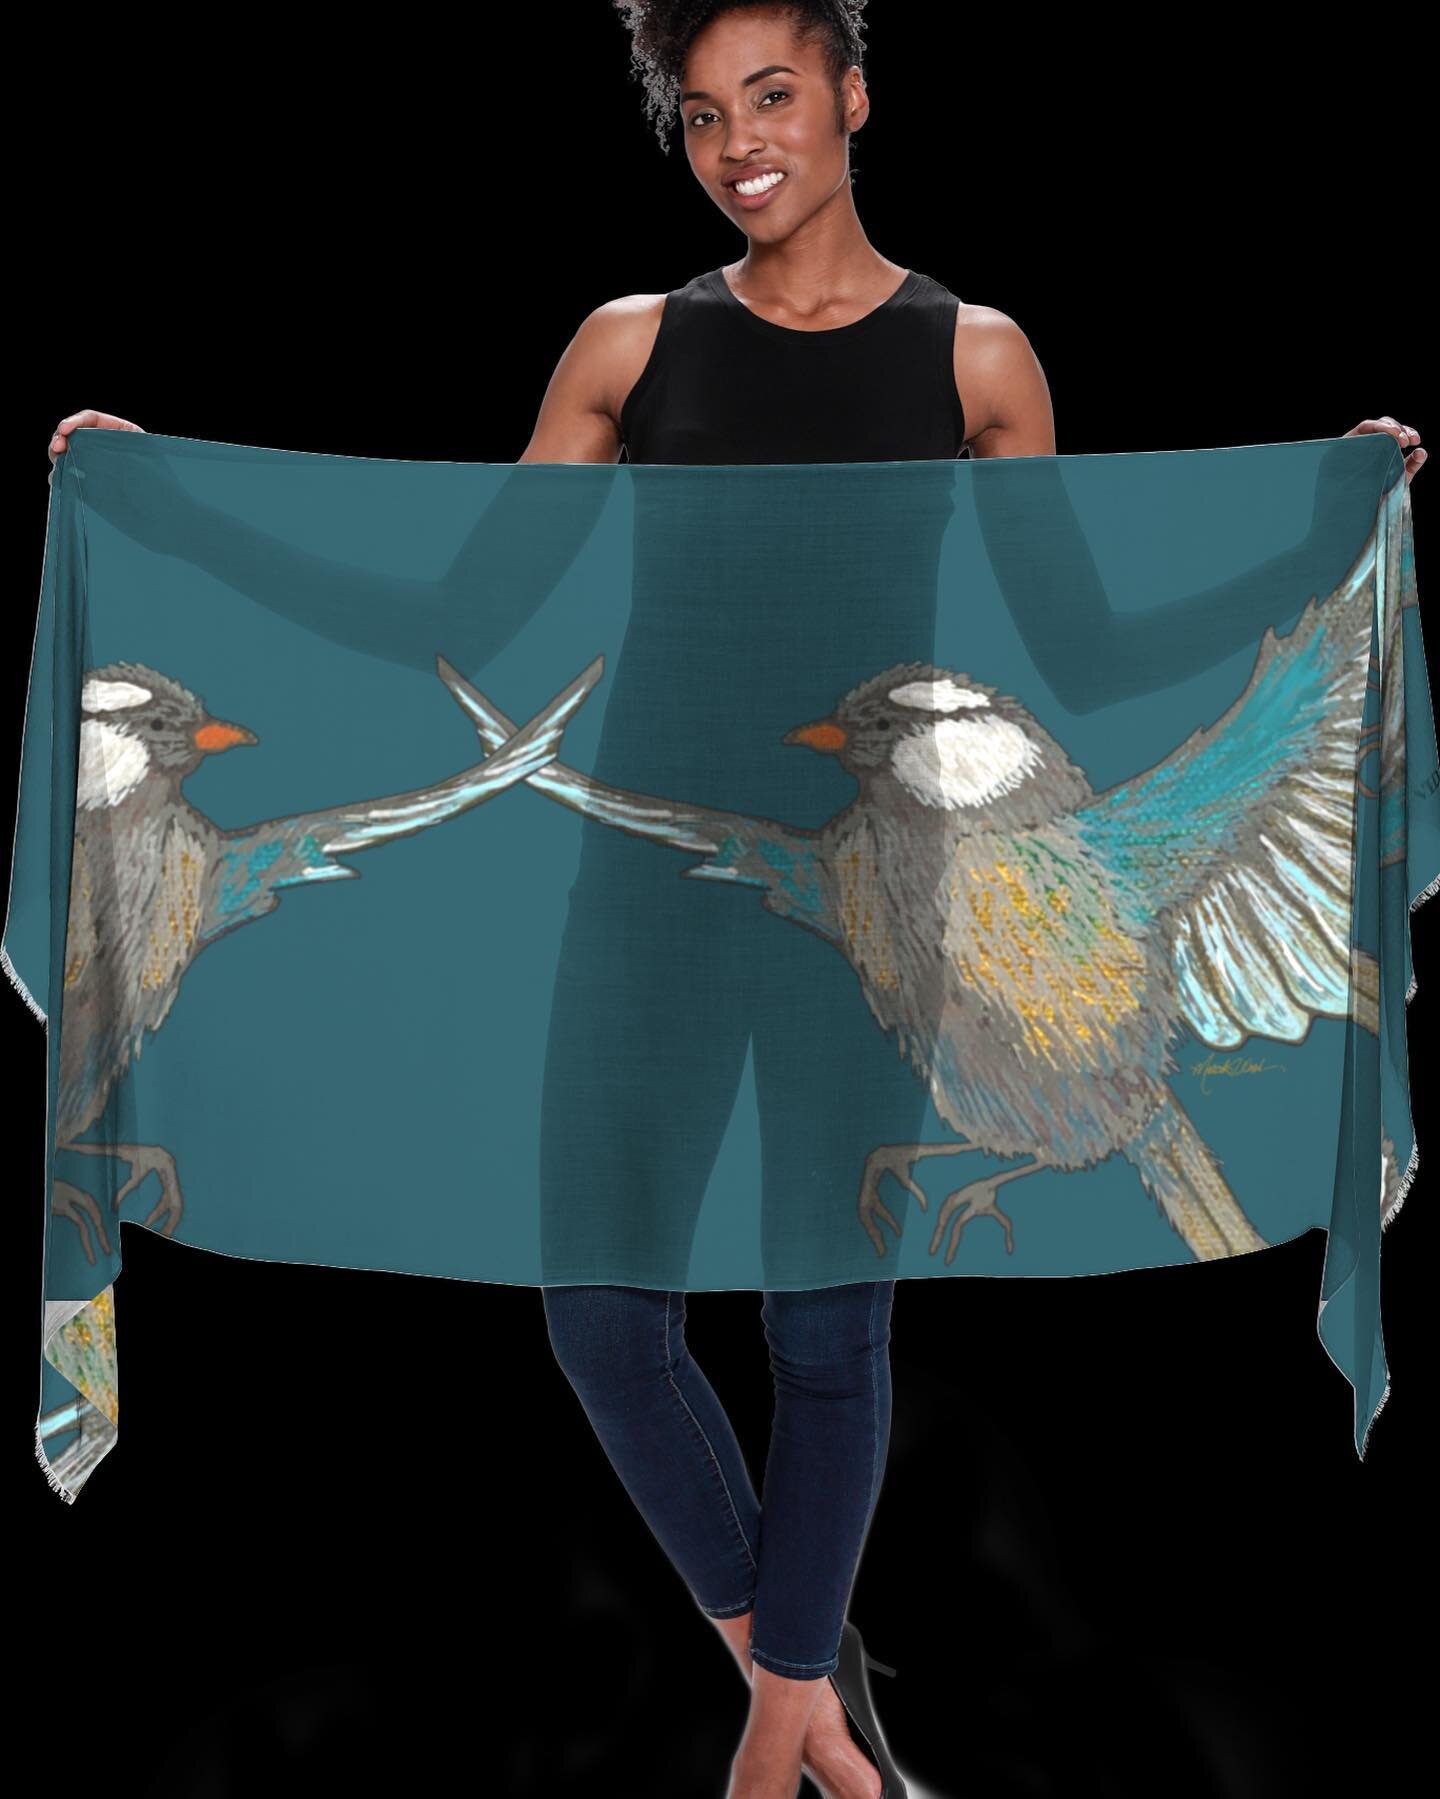 Art scarf: Protected

&ldquo;God will shelter you with God&rsquo;s wings.&rdquo; Psalm 91

This beautiful scarf has two birds, in a protective stance, covering your back. The design feels ancient and strong. The deep teal color is sure to match many 